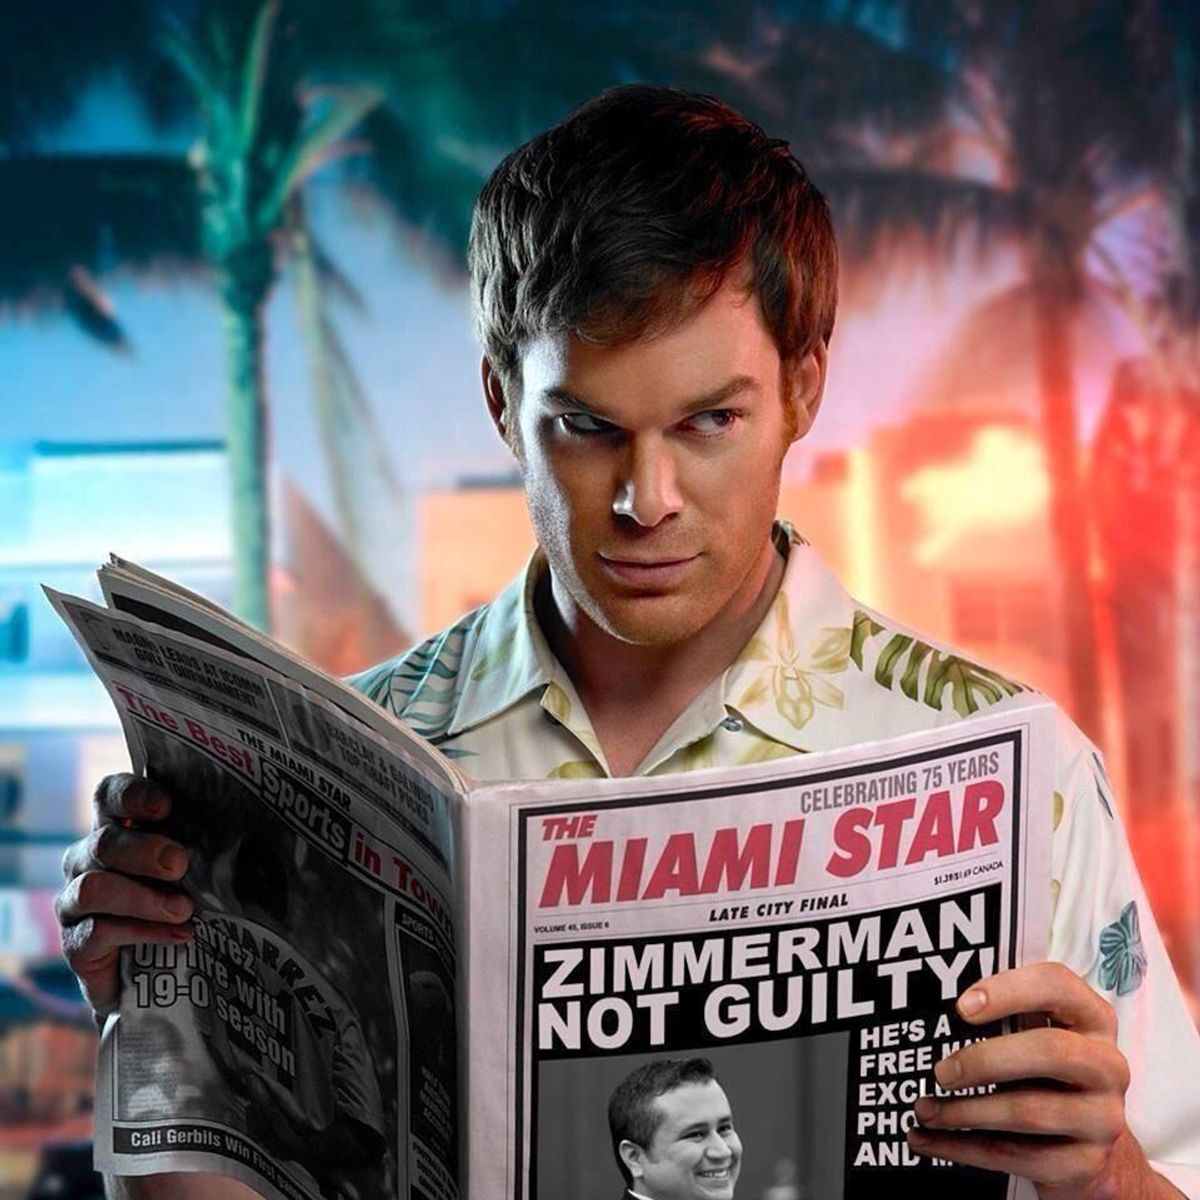 A photoshopped image of Dexter reading about Zimmerman's acquittal            (dexterpodcast/Flickr)